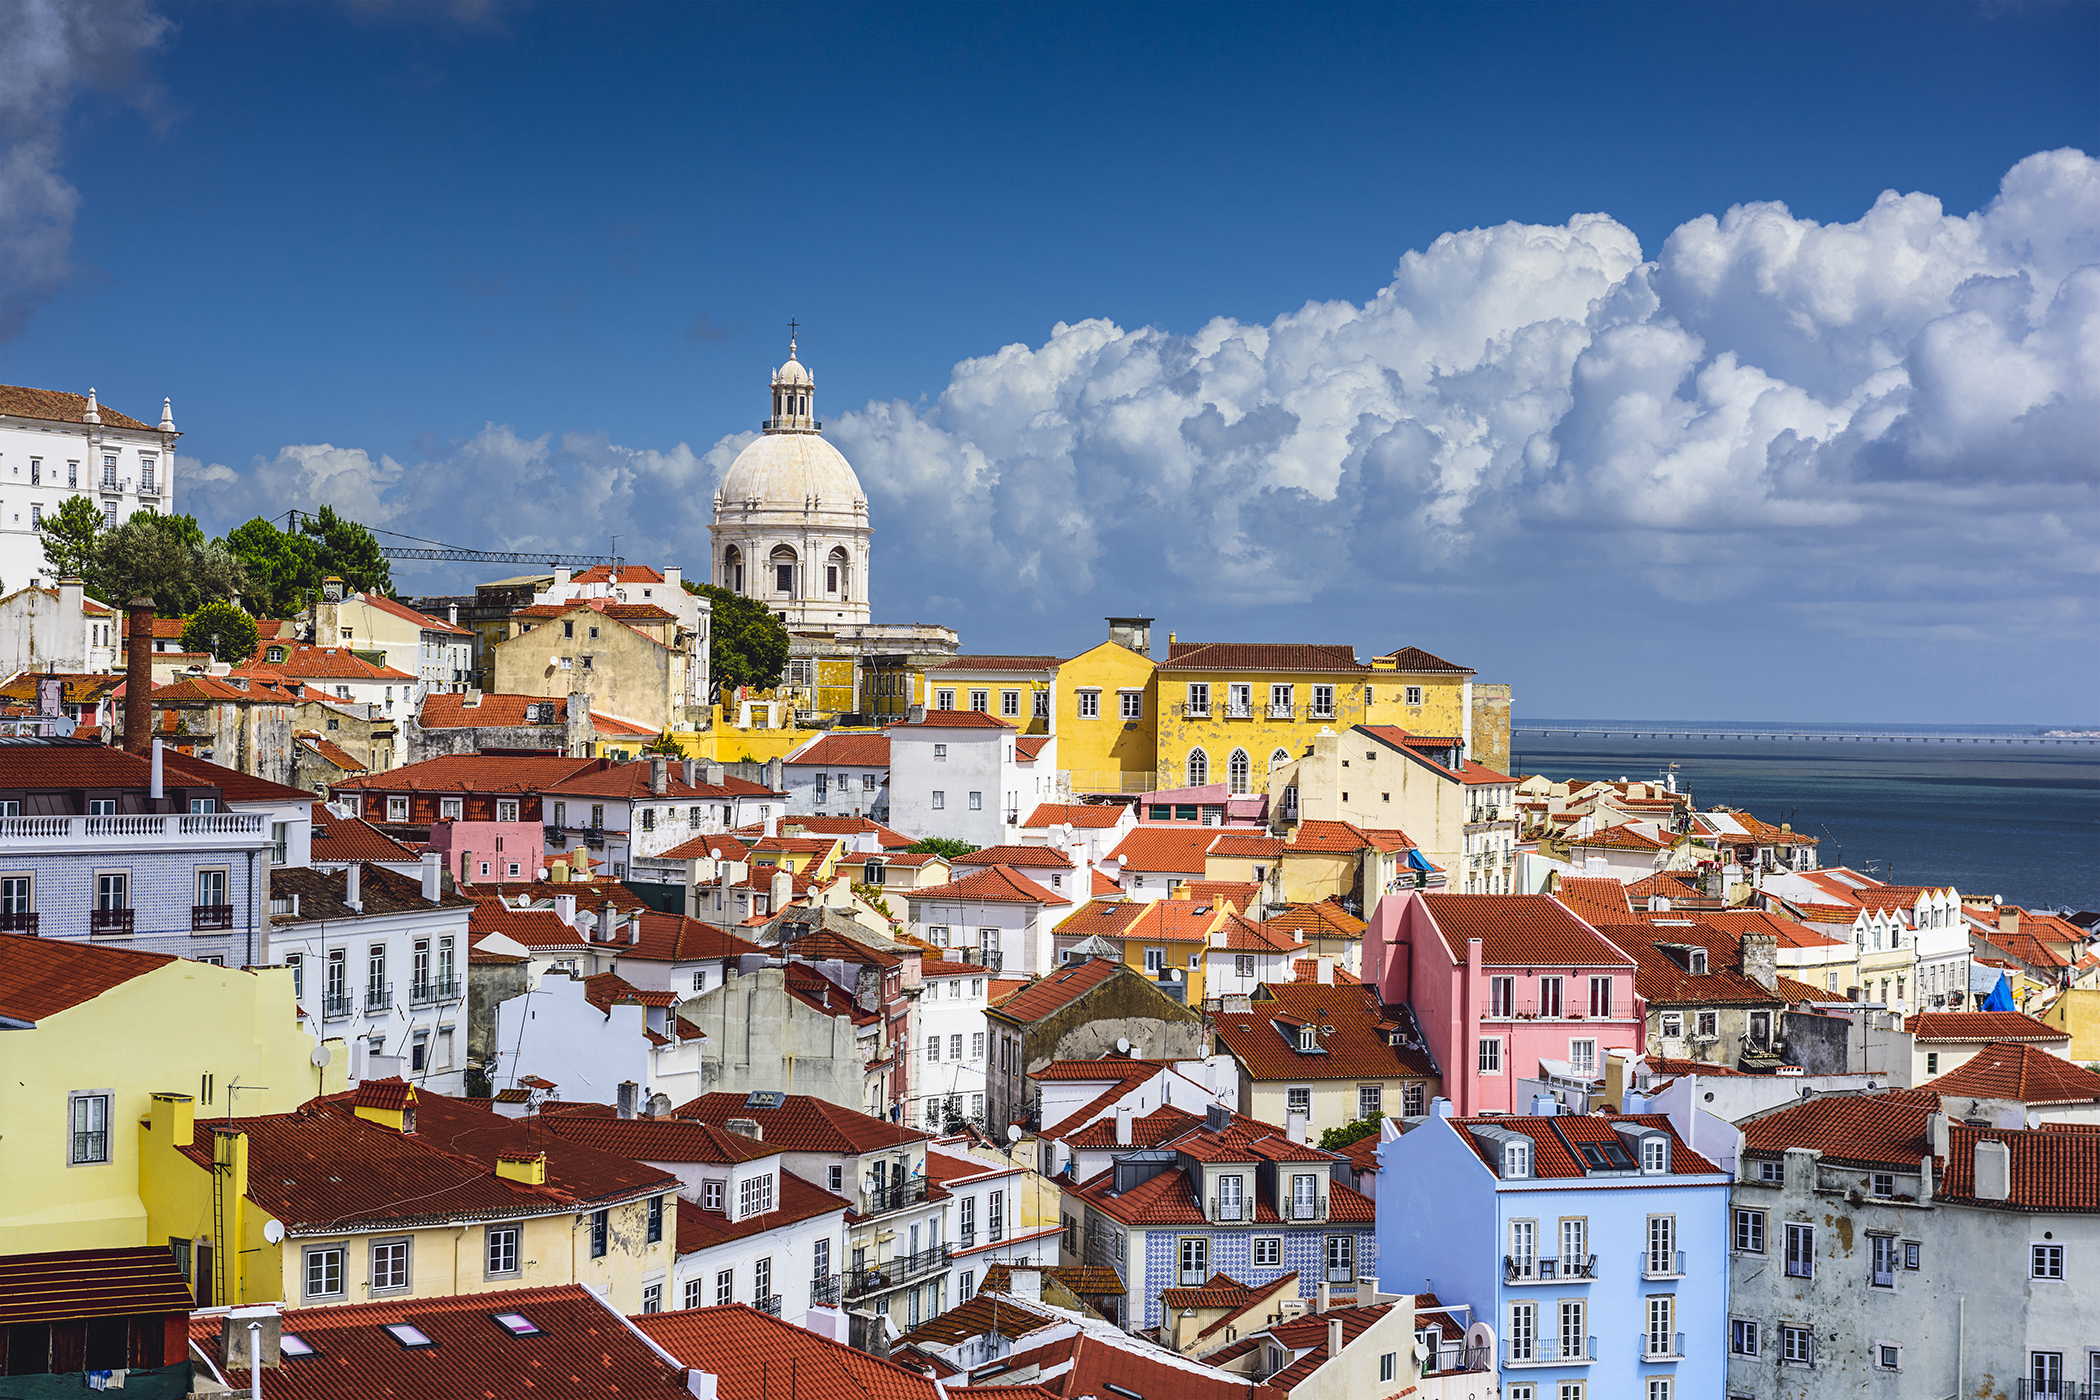 Lisbon, Portugal skyline at Alfama, the oldest district of the city. (Sean Pavone—Getty Images/iStockphoto)